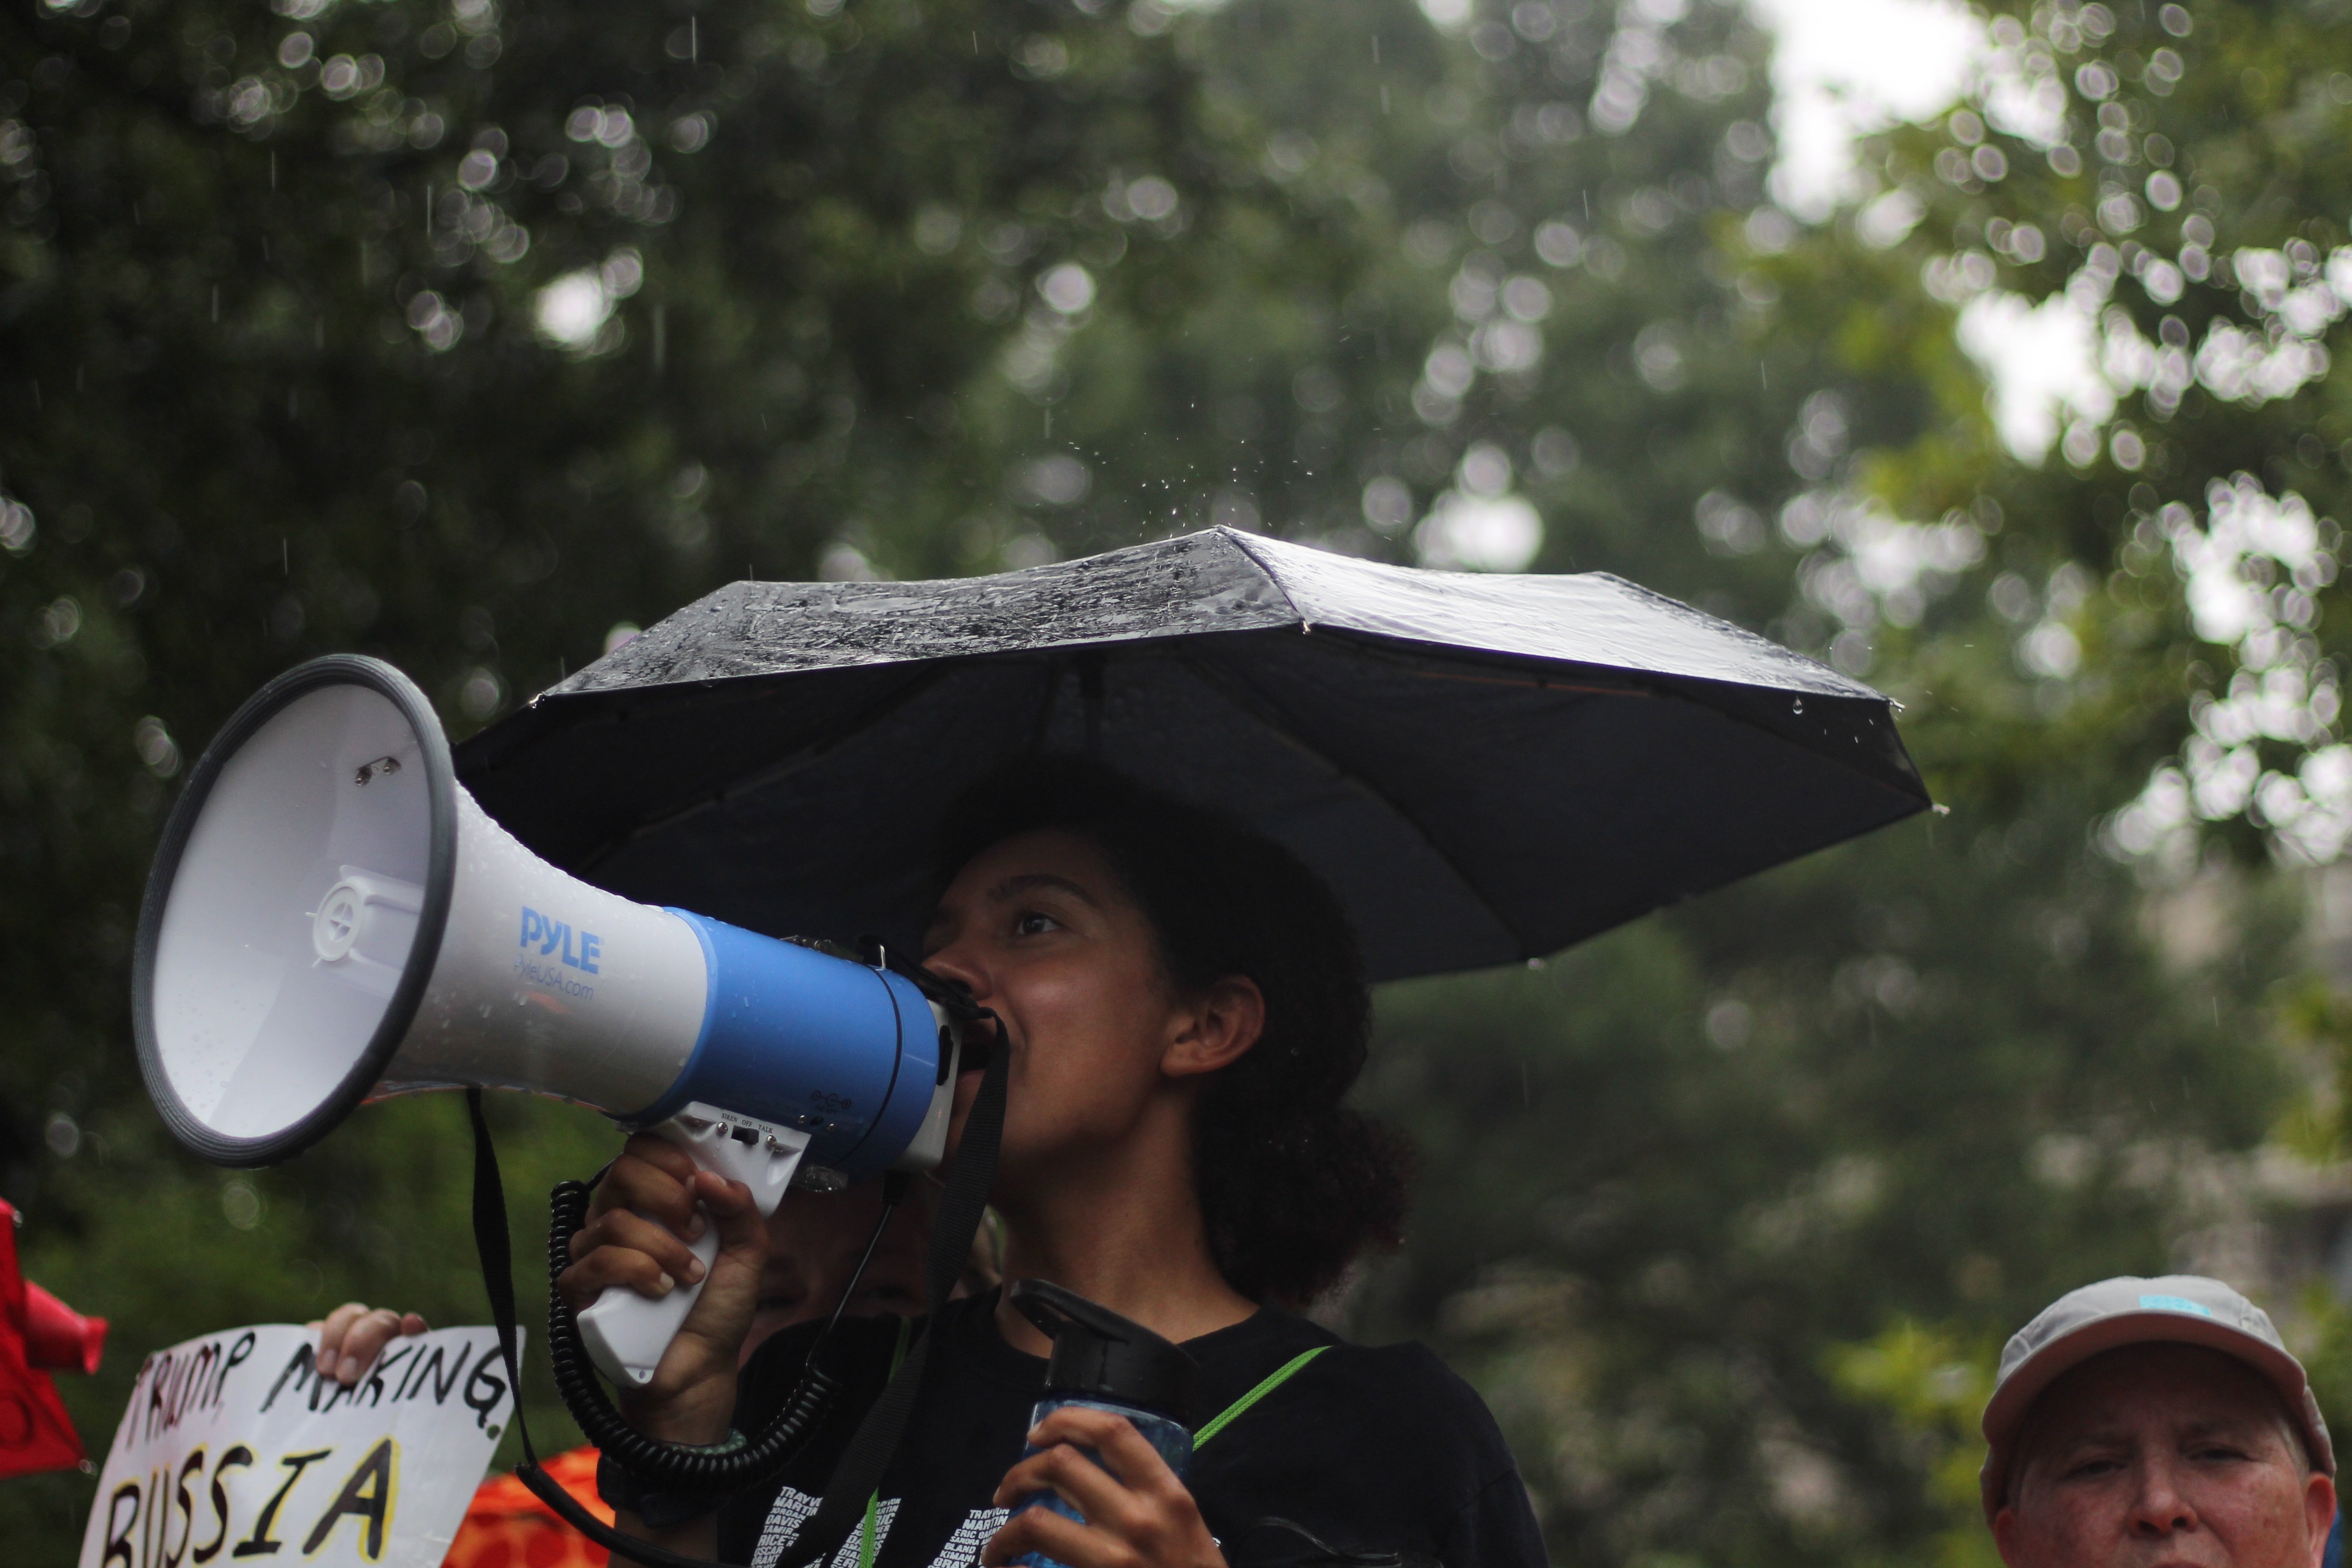 woman-with-umbrella-and-megaphone-image